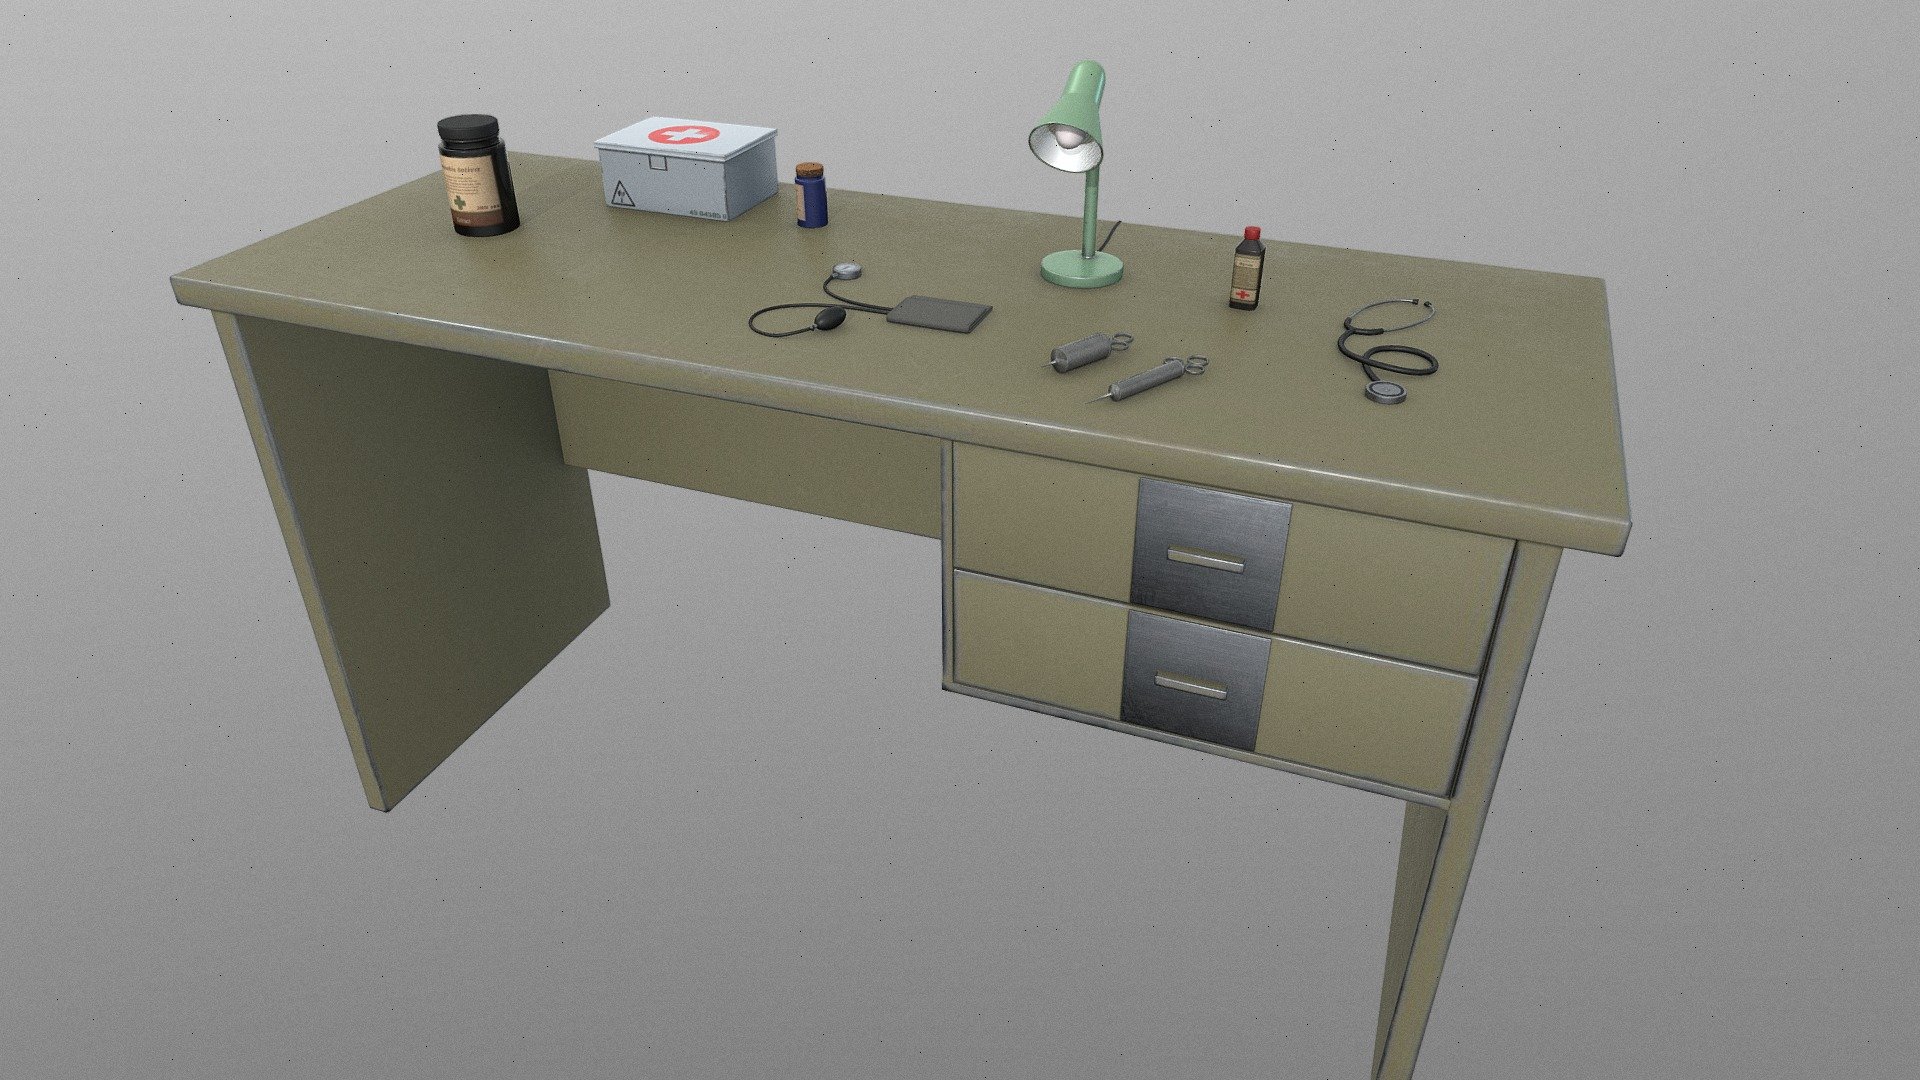 **Hospital Doctor Table - Low Poly **
(Real proportions).

Game Ready! 




There are 10 assets in one file, each one has its own name. 

All assets have the same default material. 

There is only one set of PBR textures for all meshes. 

The topology is quad-based. 

There are no ngos in the mesh. 

All medicines labels are fictitious and royalty-free..

Assets: 1 table, 1 stethoscope, 1 table lamp, 1 blood pressure meter, 2 syringes, 1 first aid box and 3 bottles. 




There is a zip file with .blend, .obj .fbx and textures. 

*object was not modeled for a 3d printer. 

*If you need any mesh ot texture adjustments, let me know 3d model